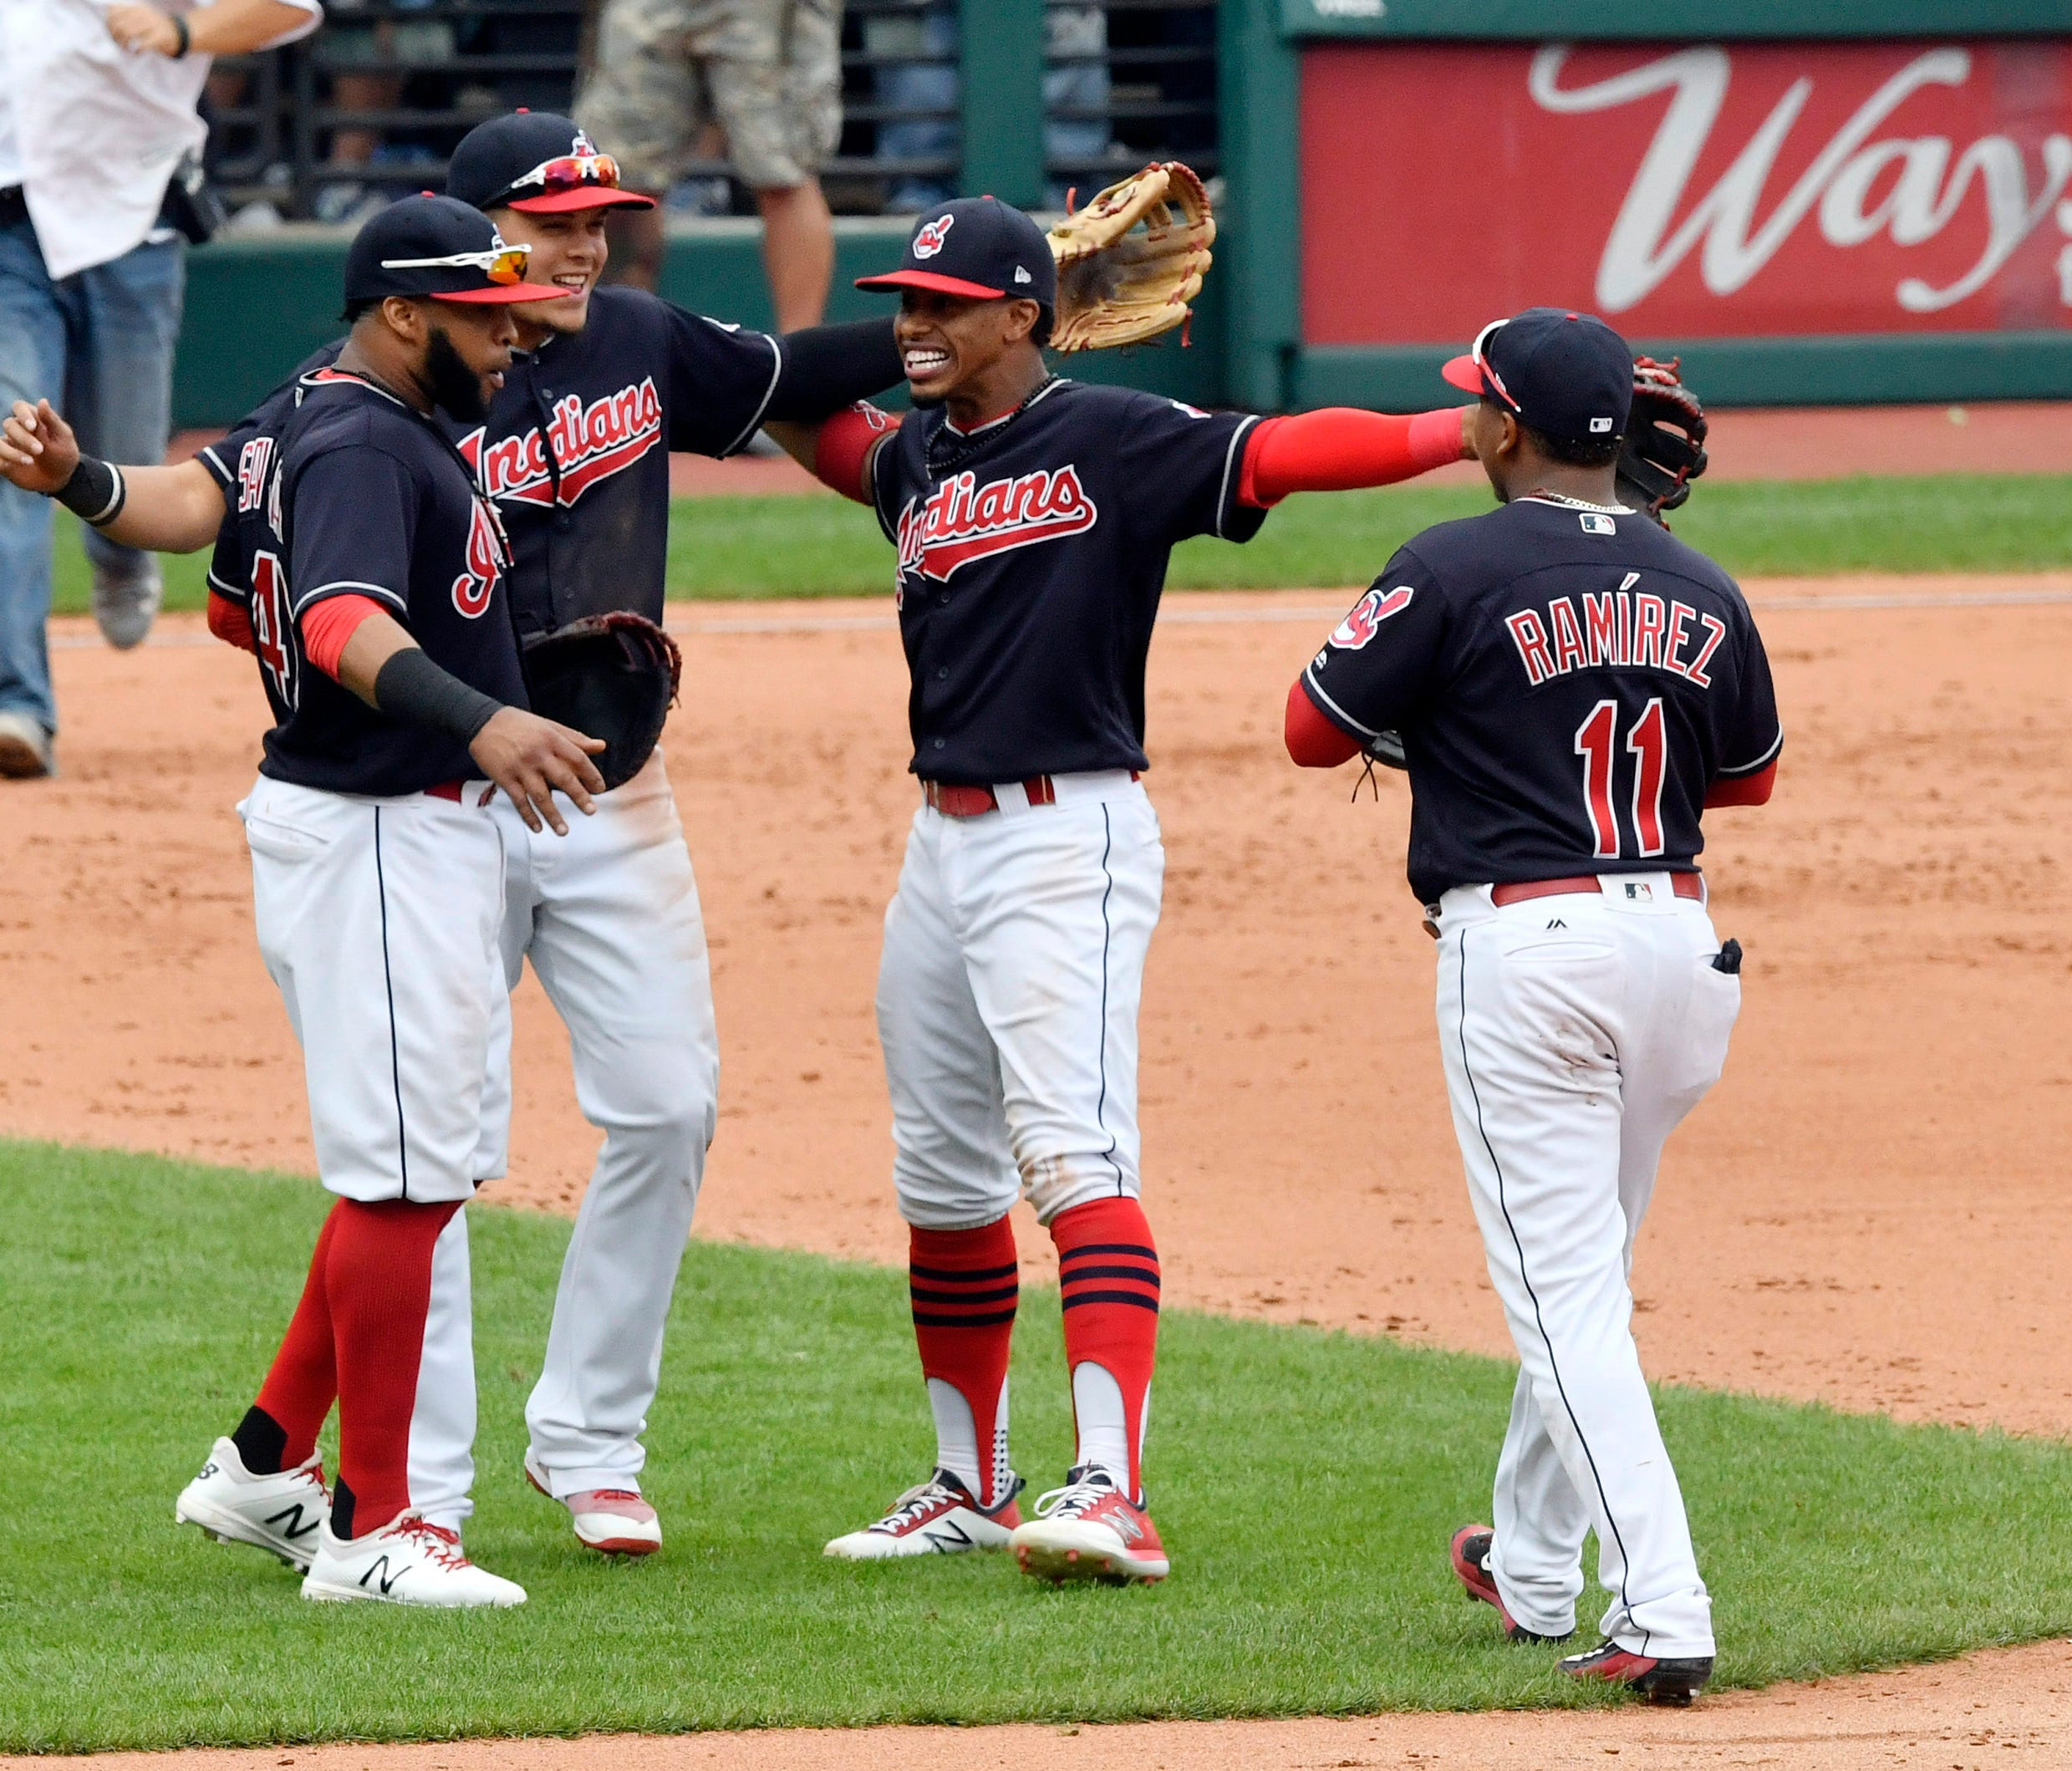 Joyful gatherings have been abundant for the Indians since they launched a 21-game winning streak.